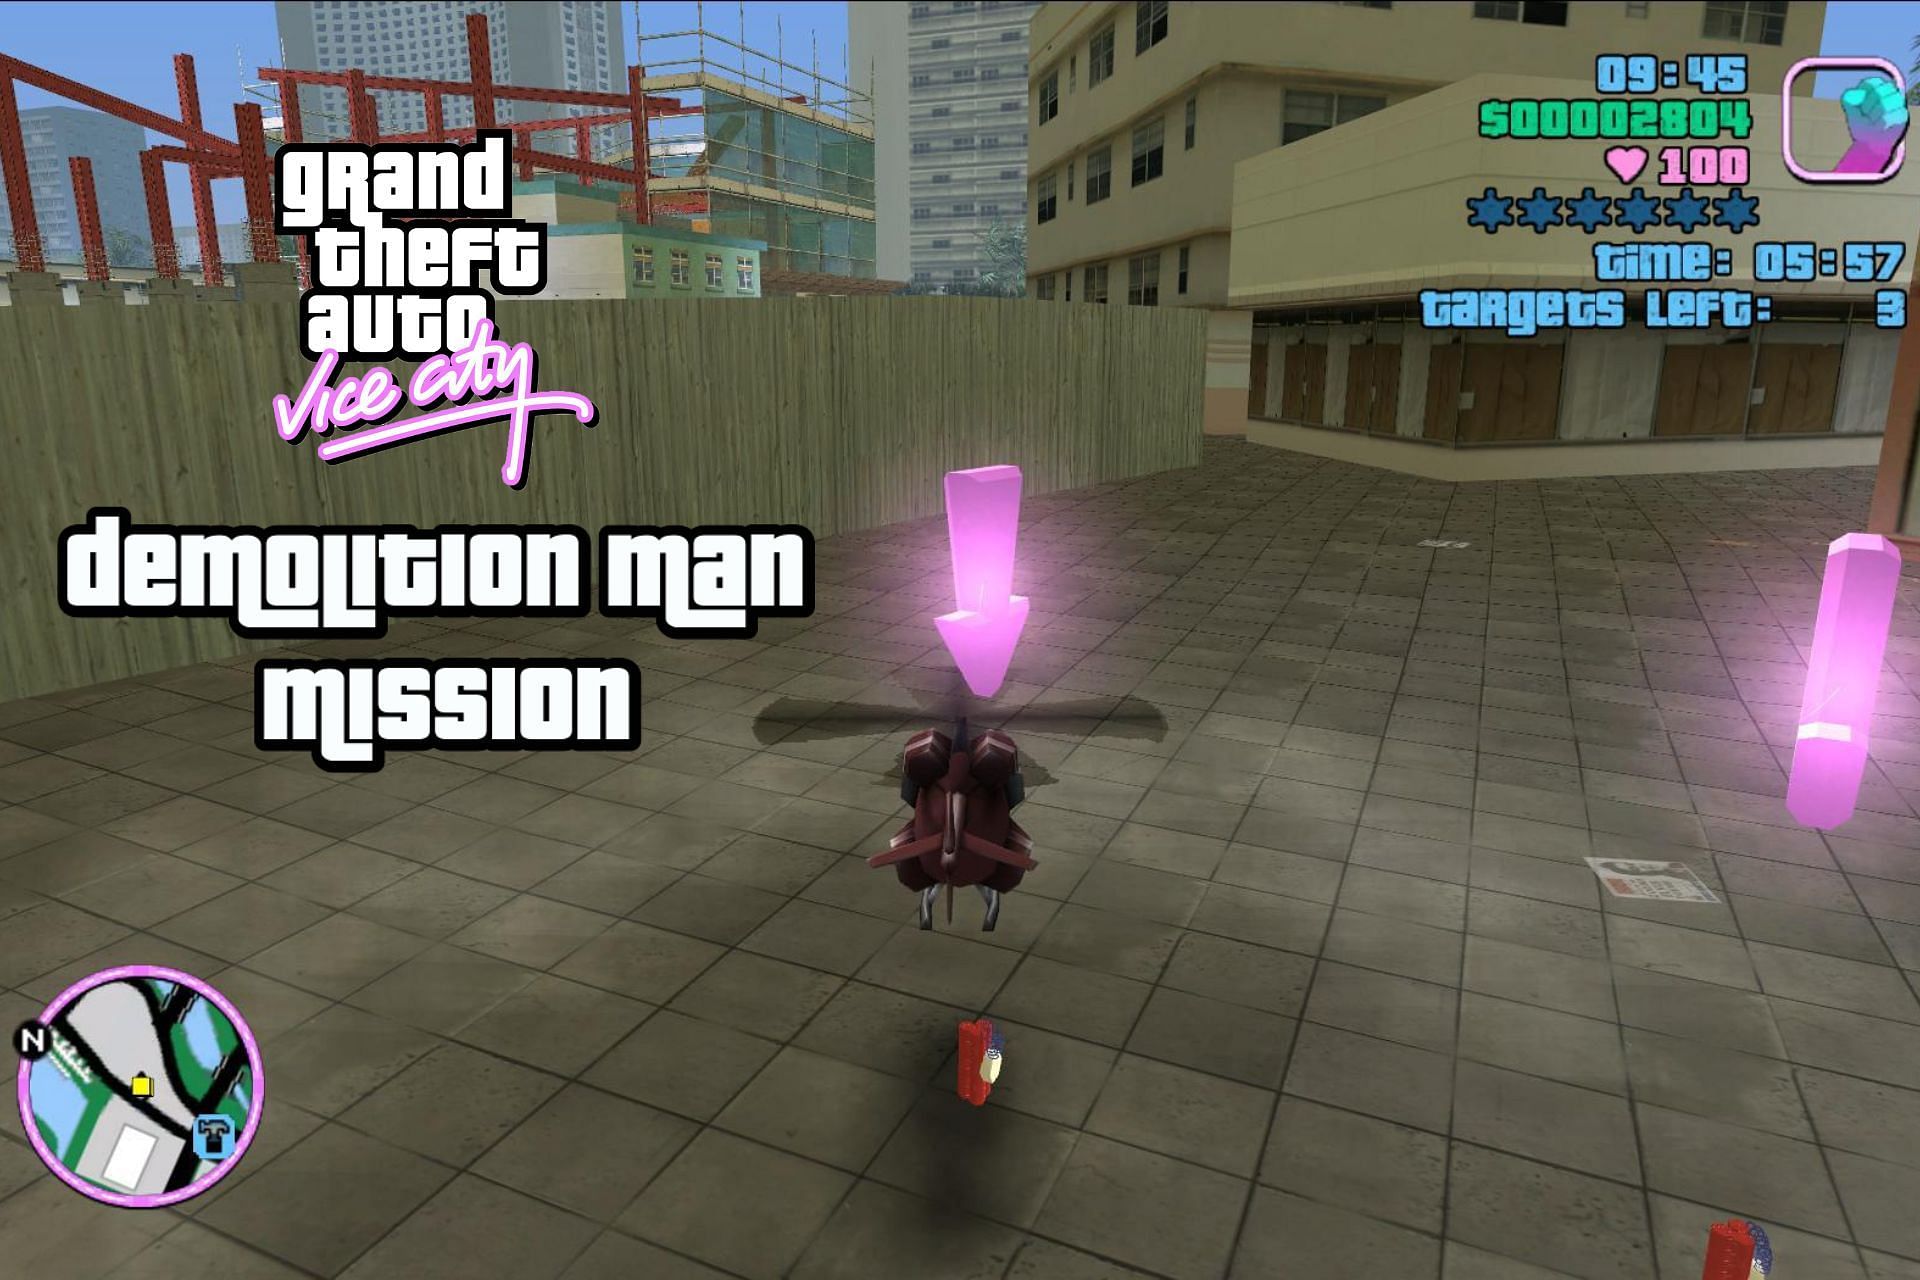 Easy method for completing the Demolition Man Mission in GTA Vice City (Image via GTA Base)